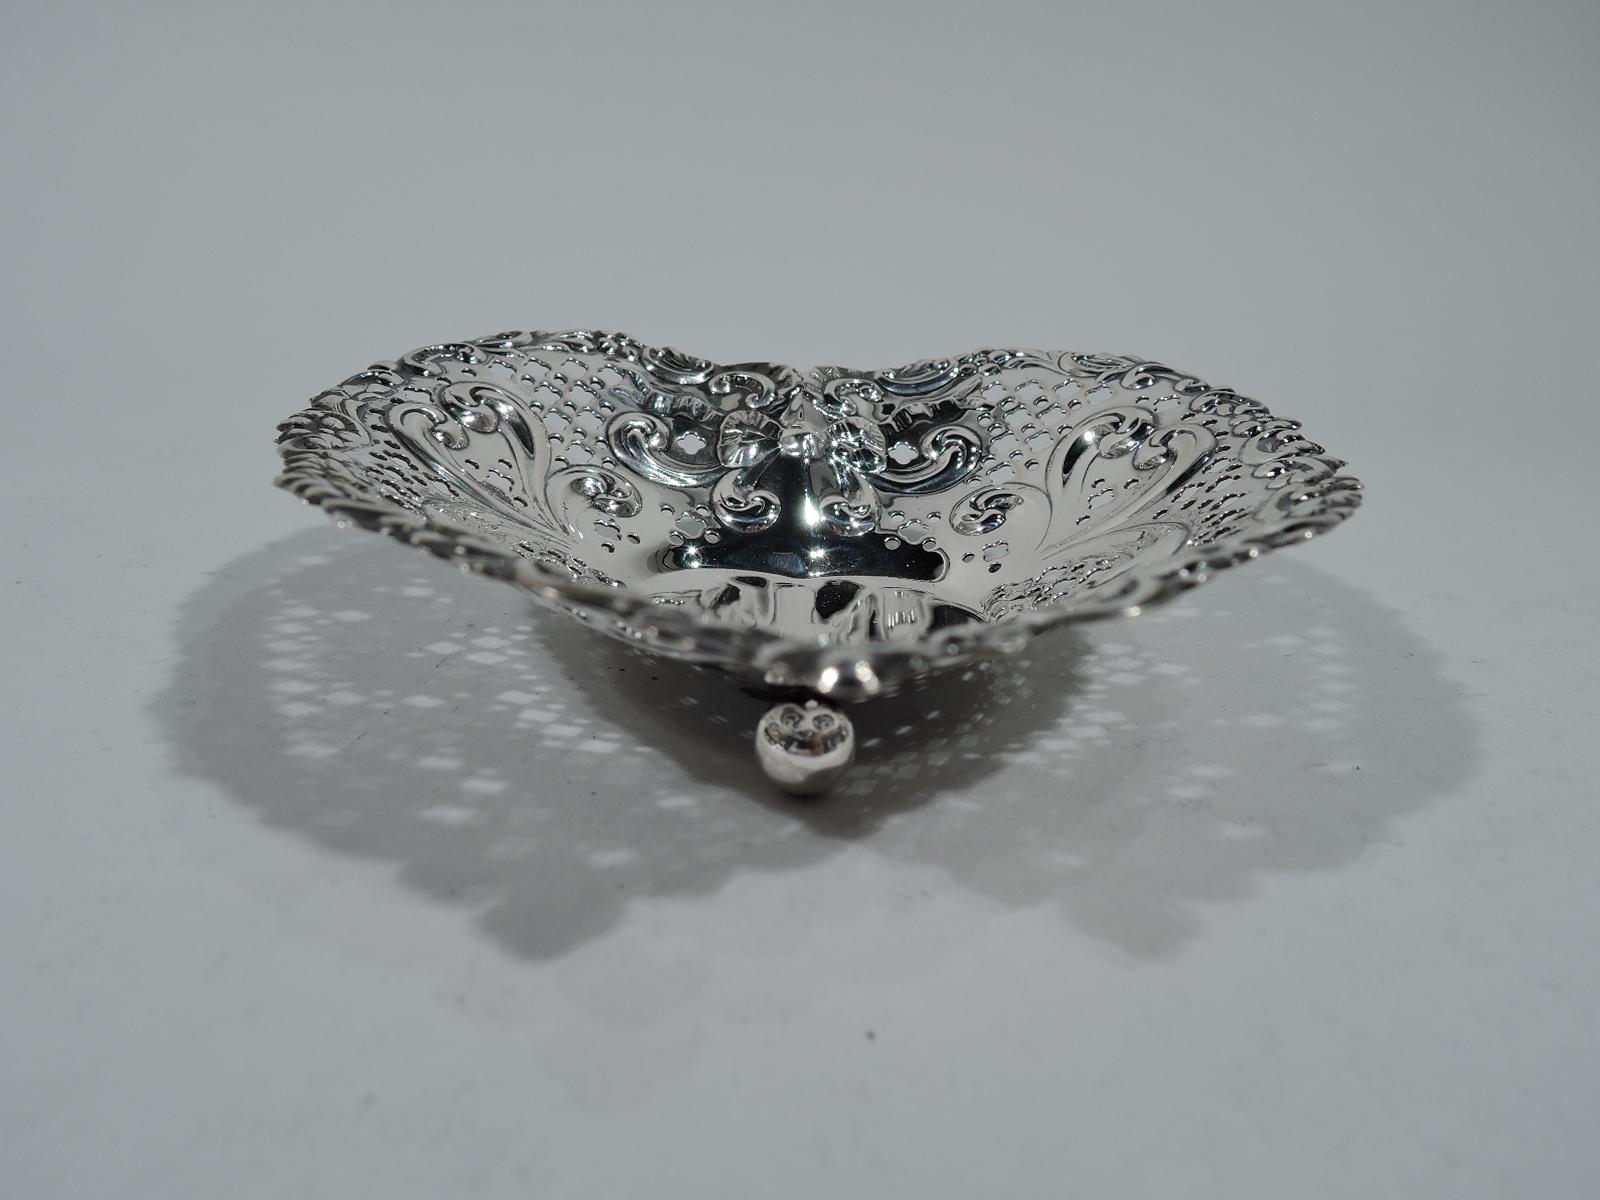 Victorian Old-Fashioned and Romantic Sterling Silver Heart Dish Bowl by Gorham